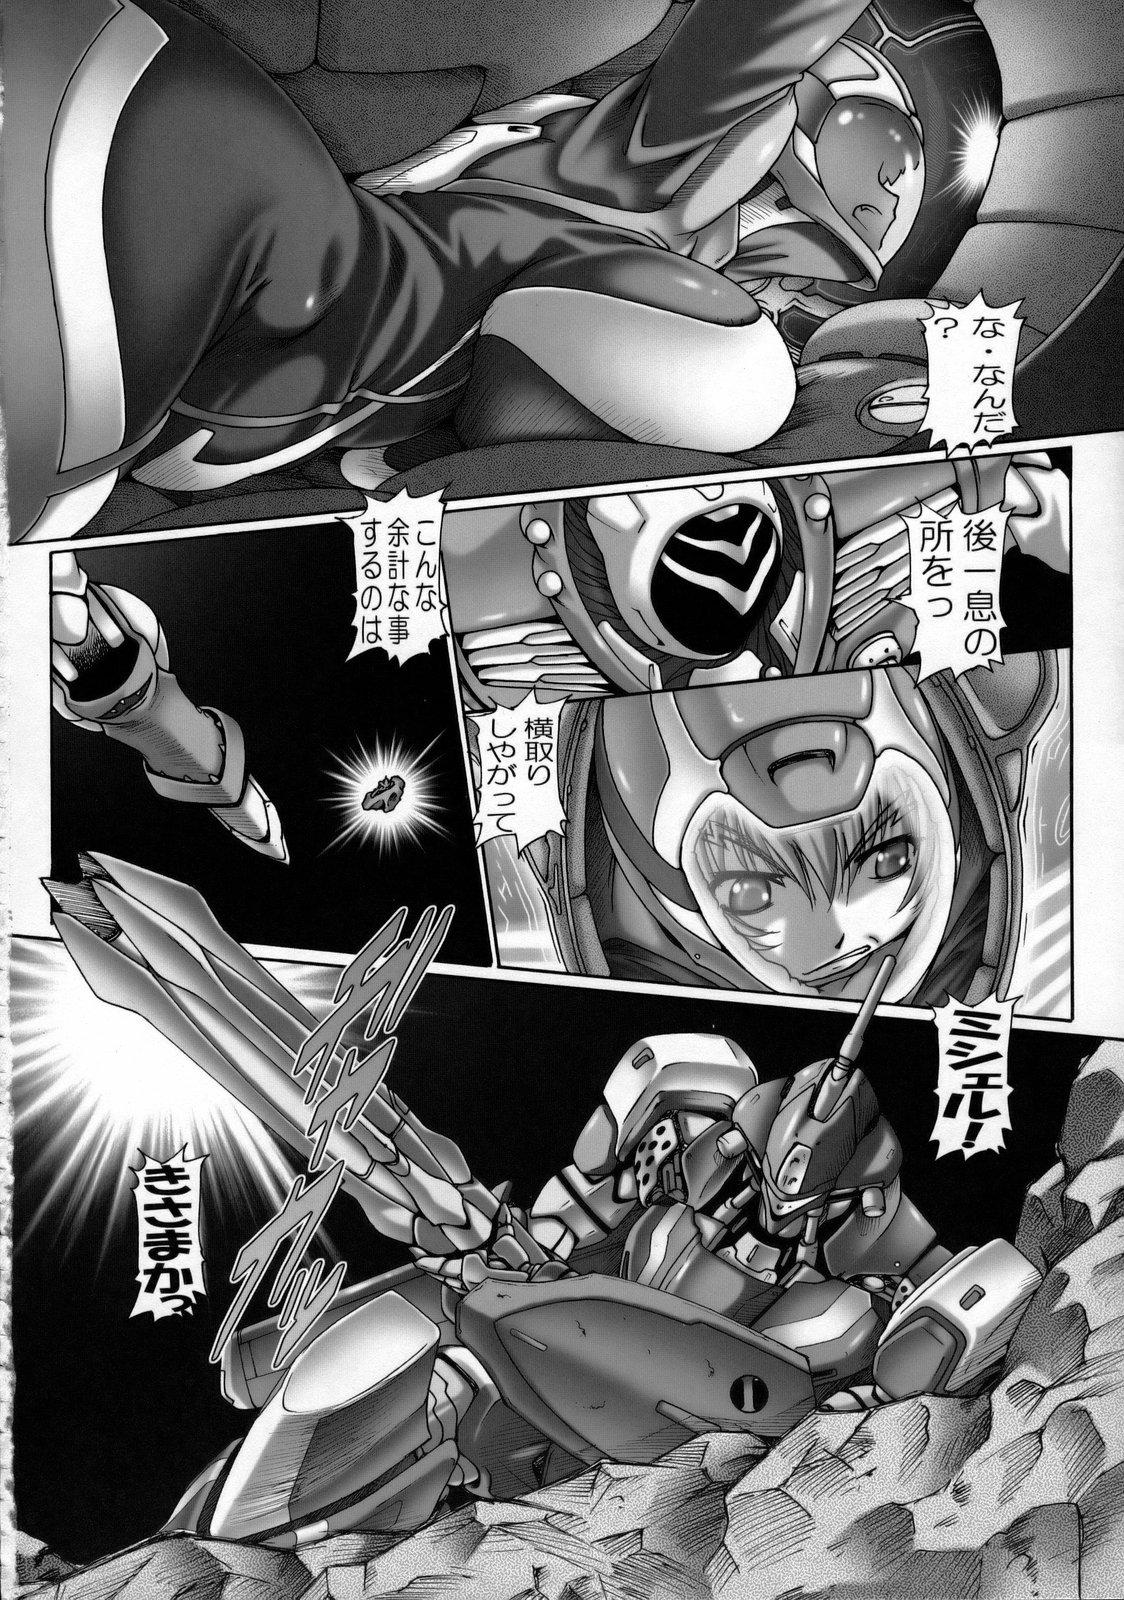 Ink PUCHI EMPIRE 2008 SUMMER - Macross frontier Gag - Page 5